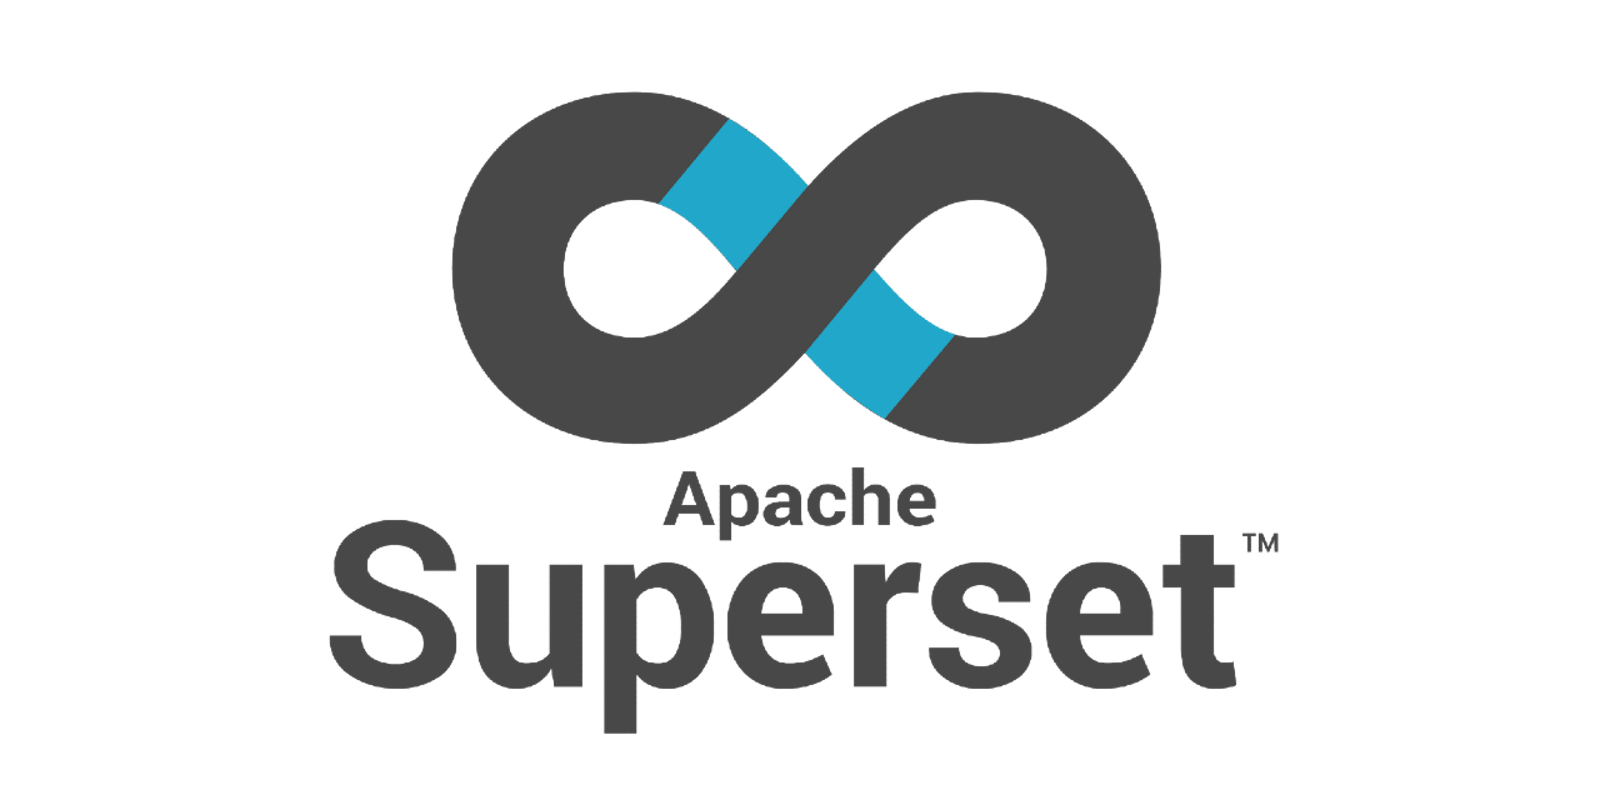 Apache Superset: Installing locally is easy using the makefile